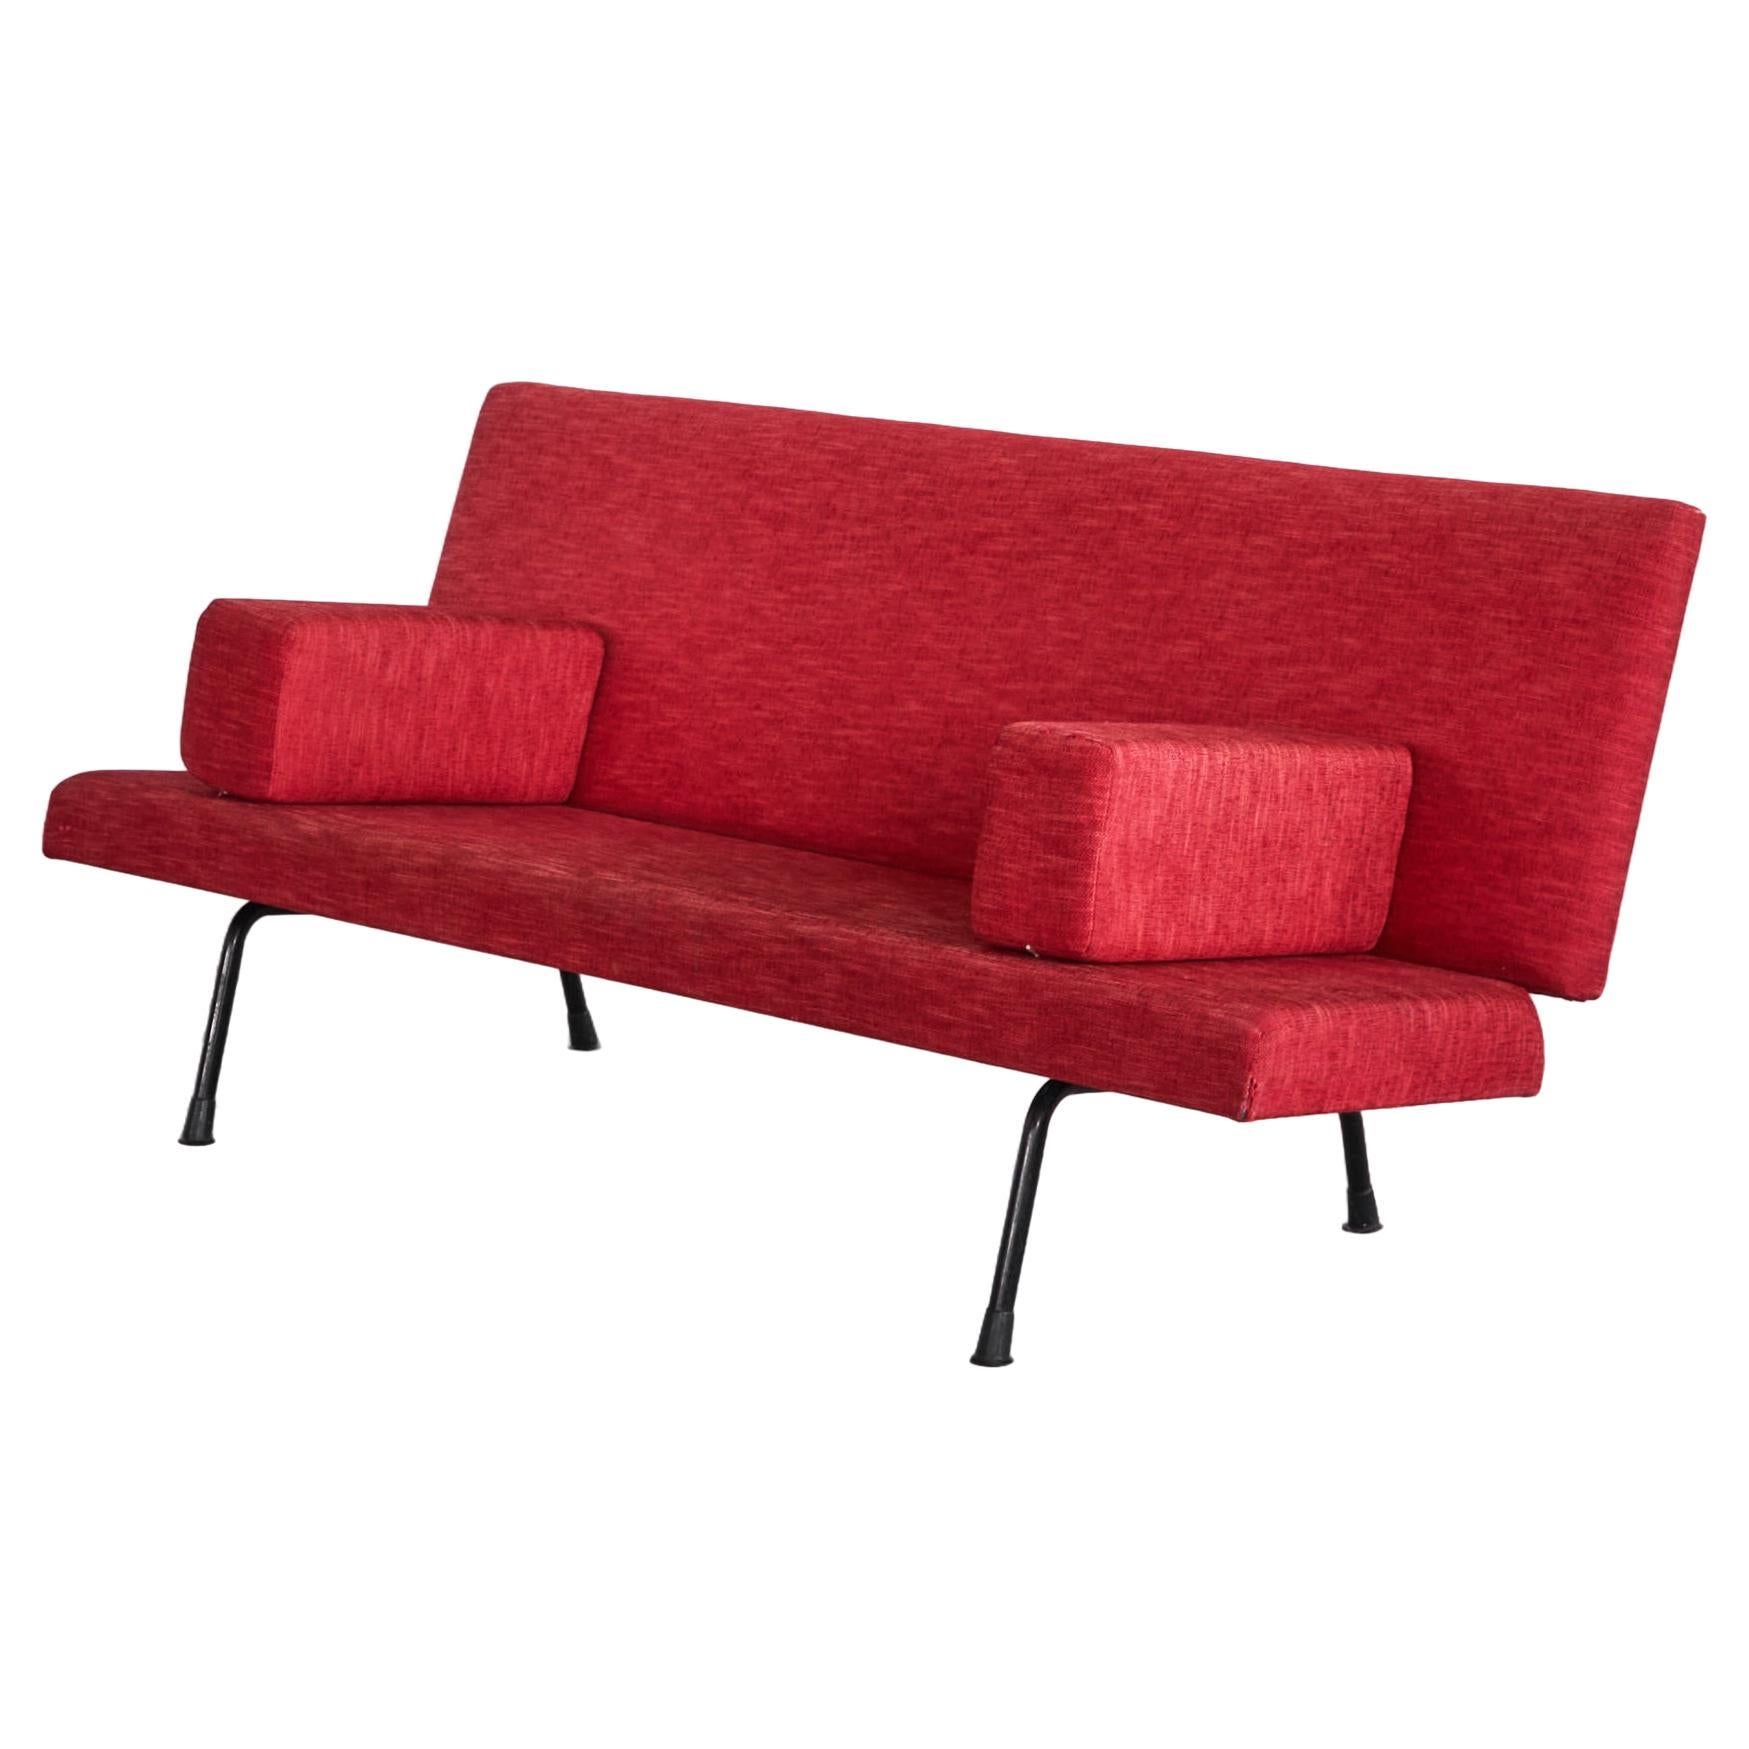 Wim Rietveld '447' Sofa in Red Fabric 1950s For Sale